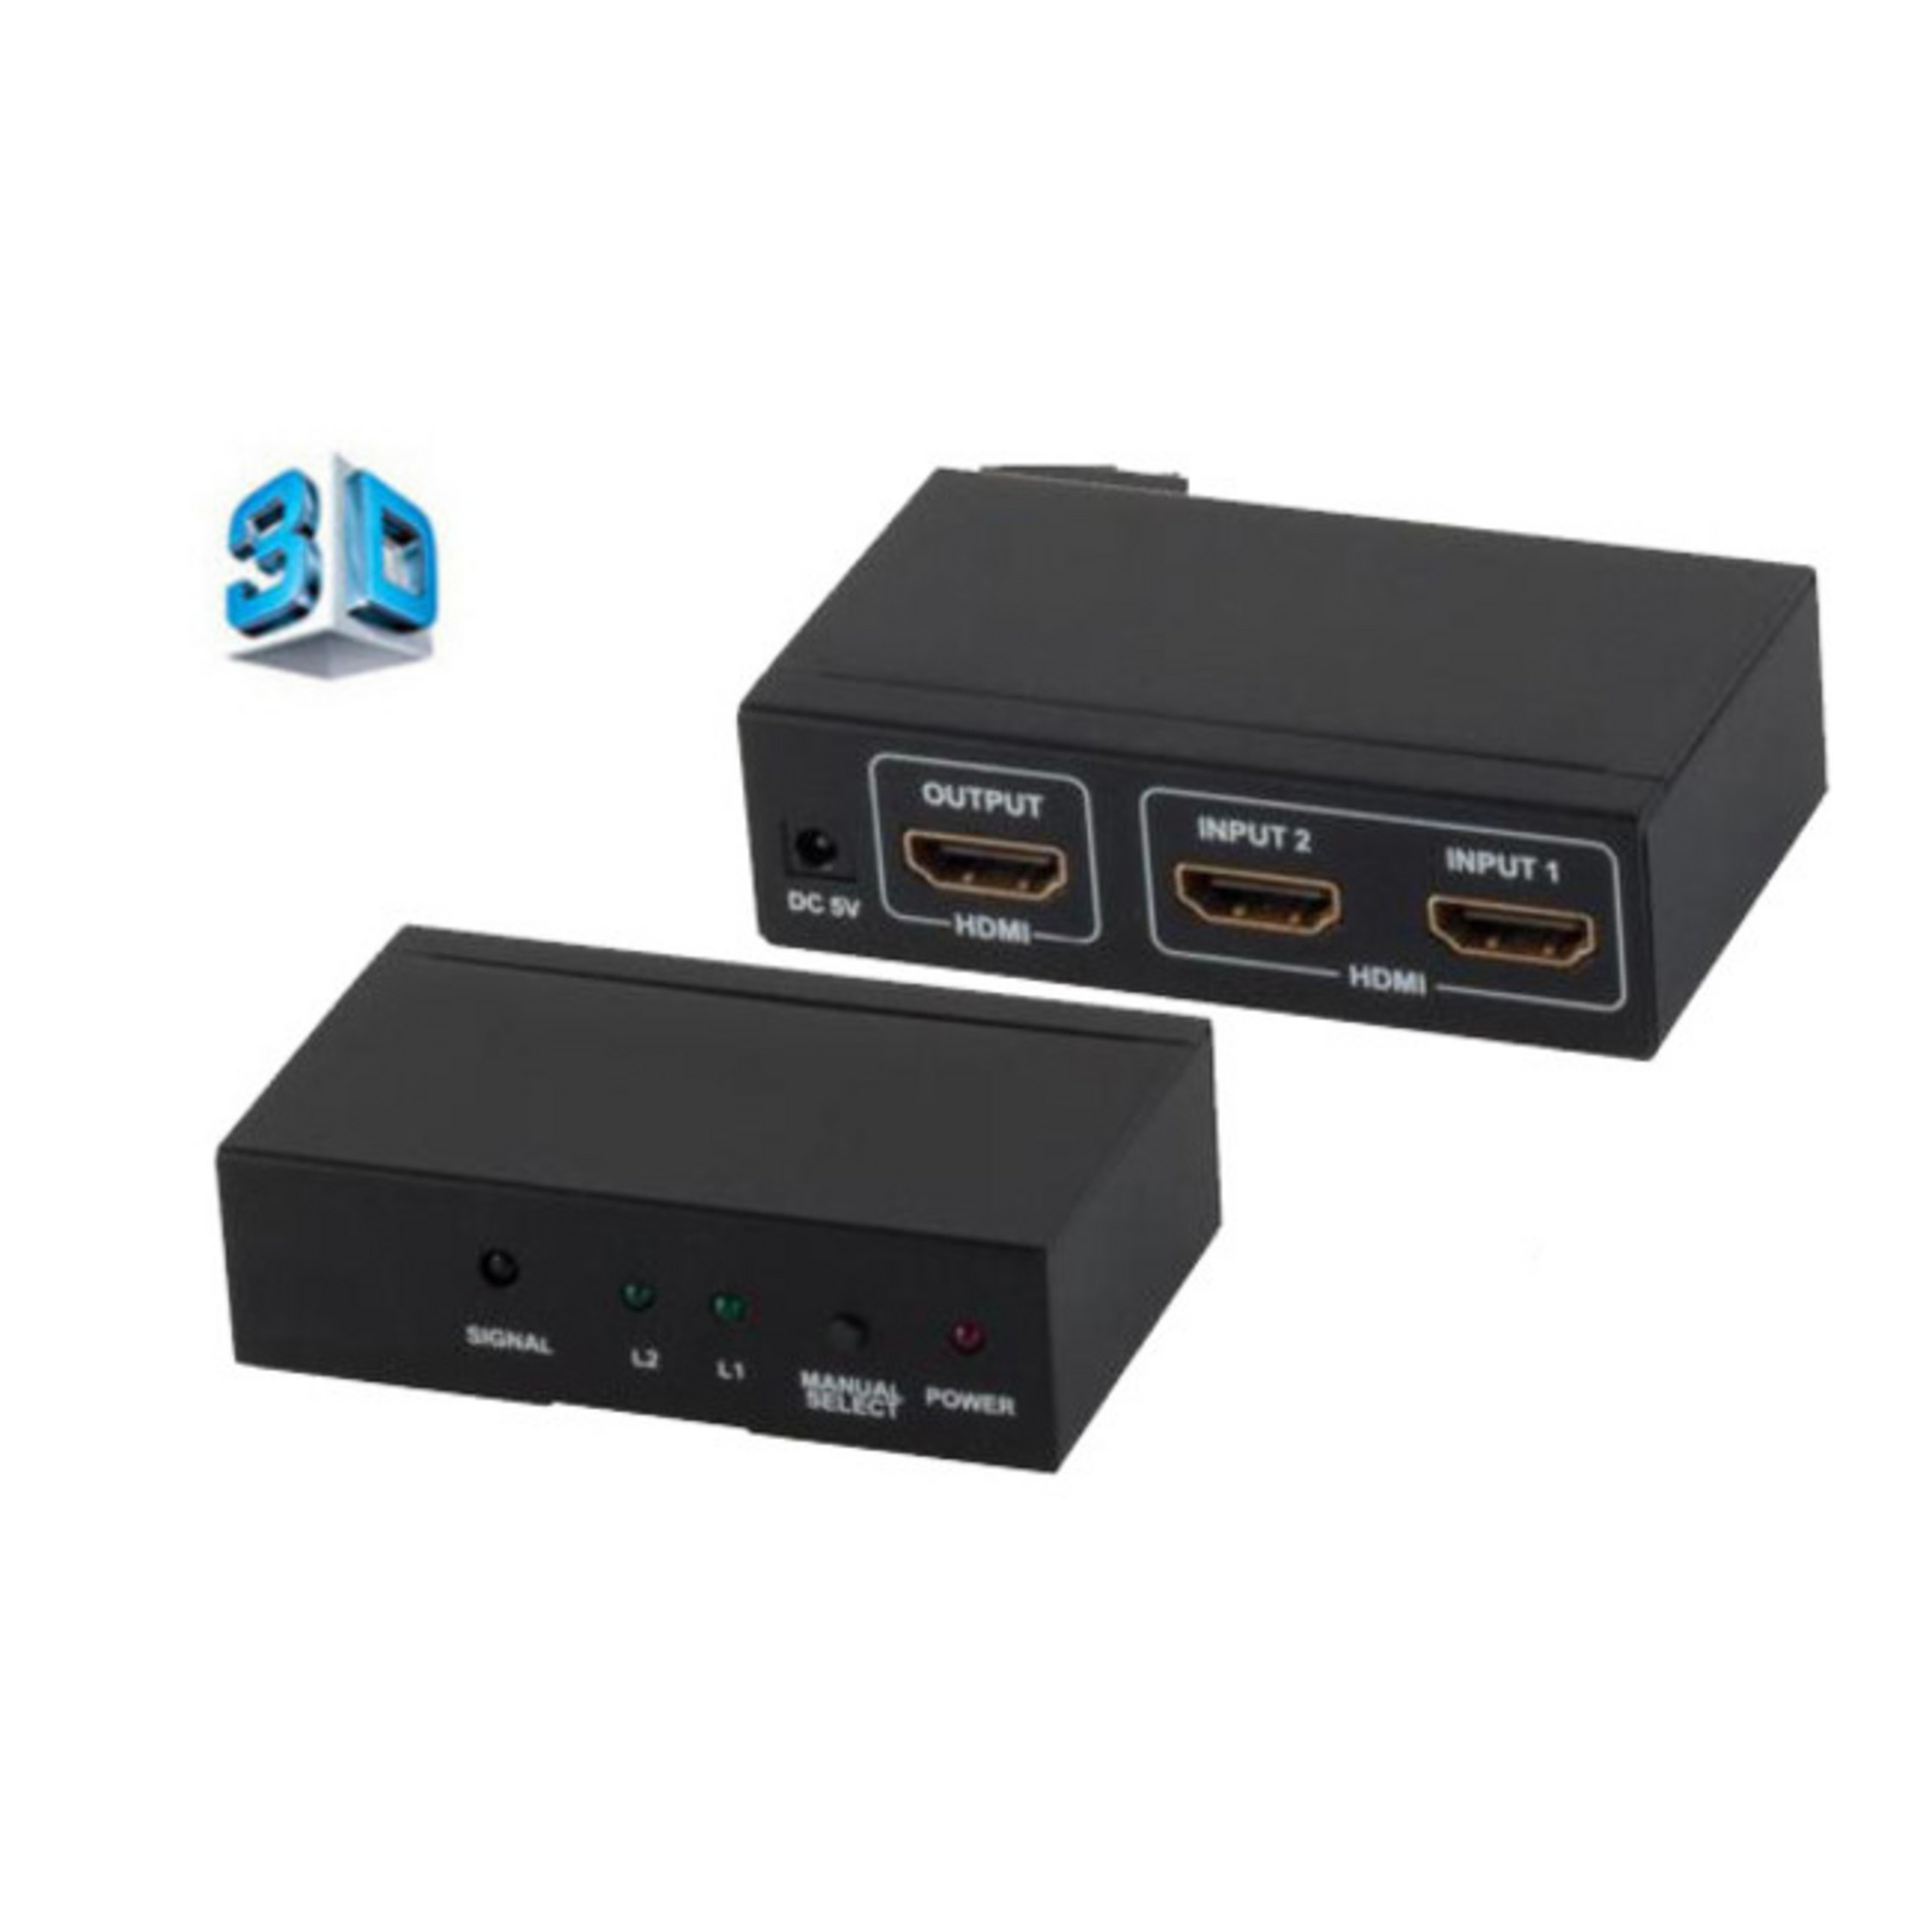 SHIVERPEAKS HDMI Switch, 2x 4K2K, VER1.4, Switch IN HDMI 3D, 1x OUT